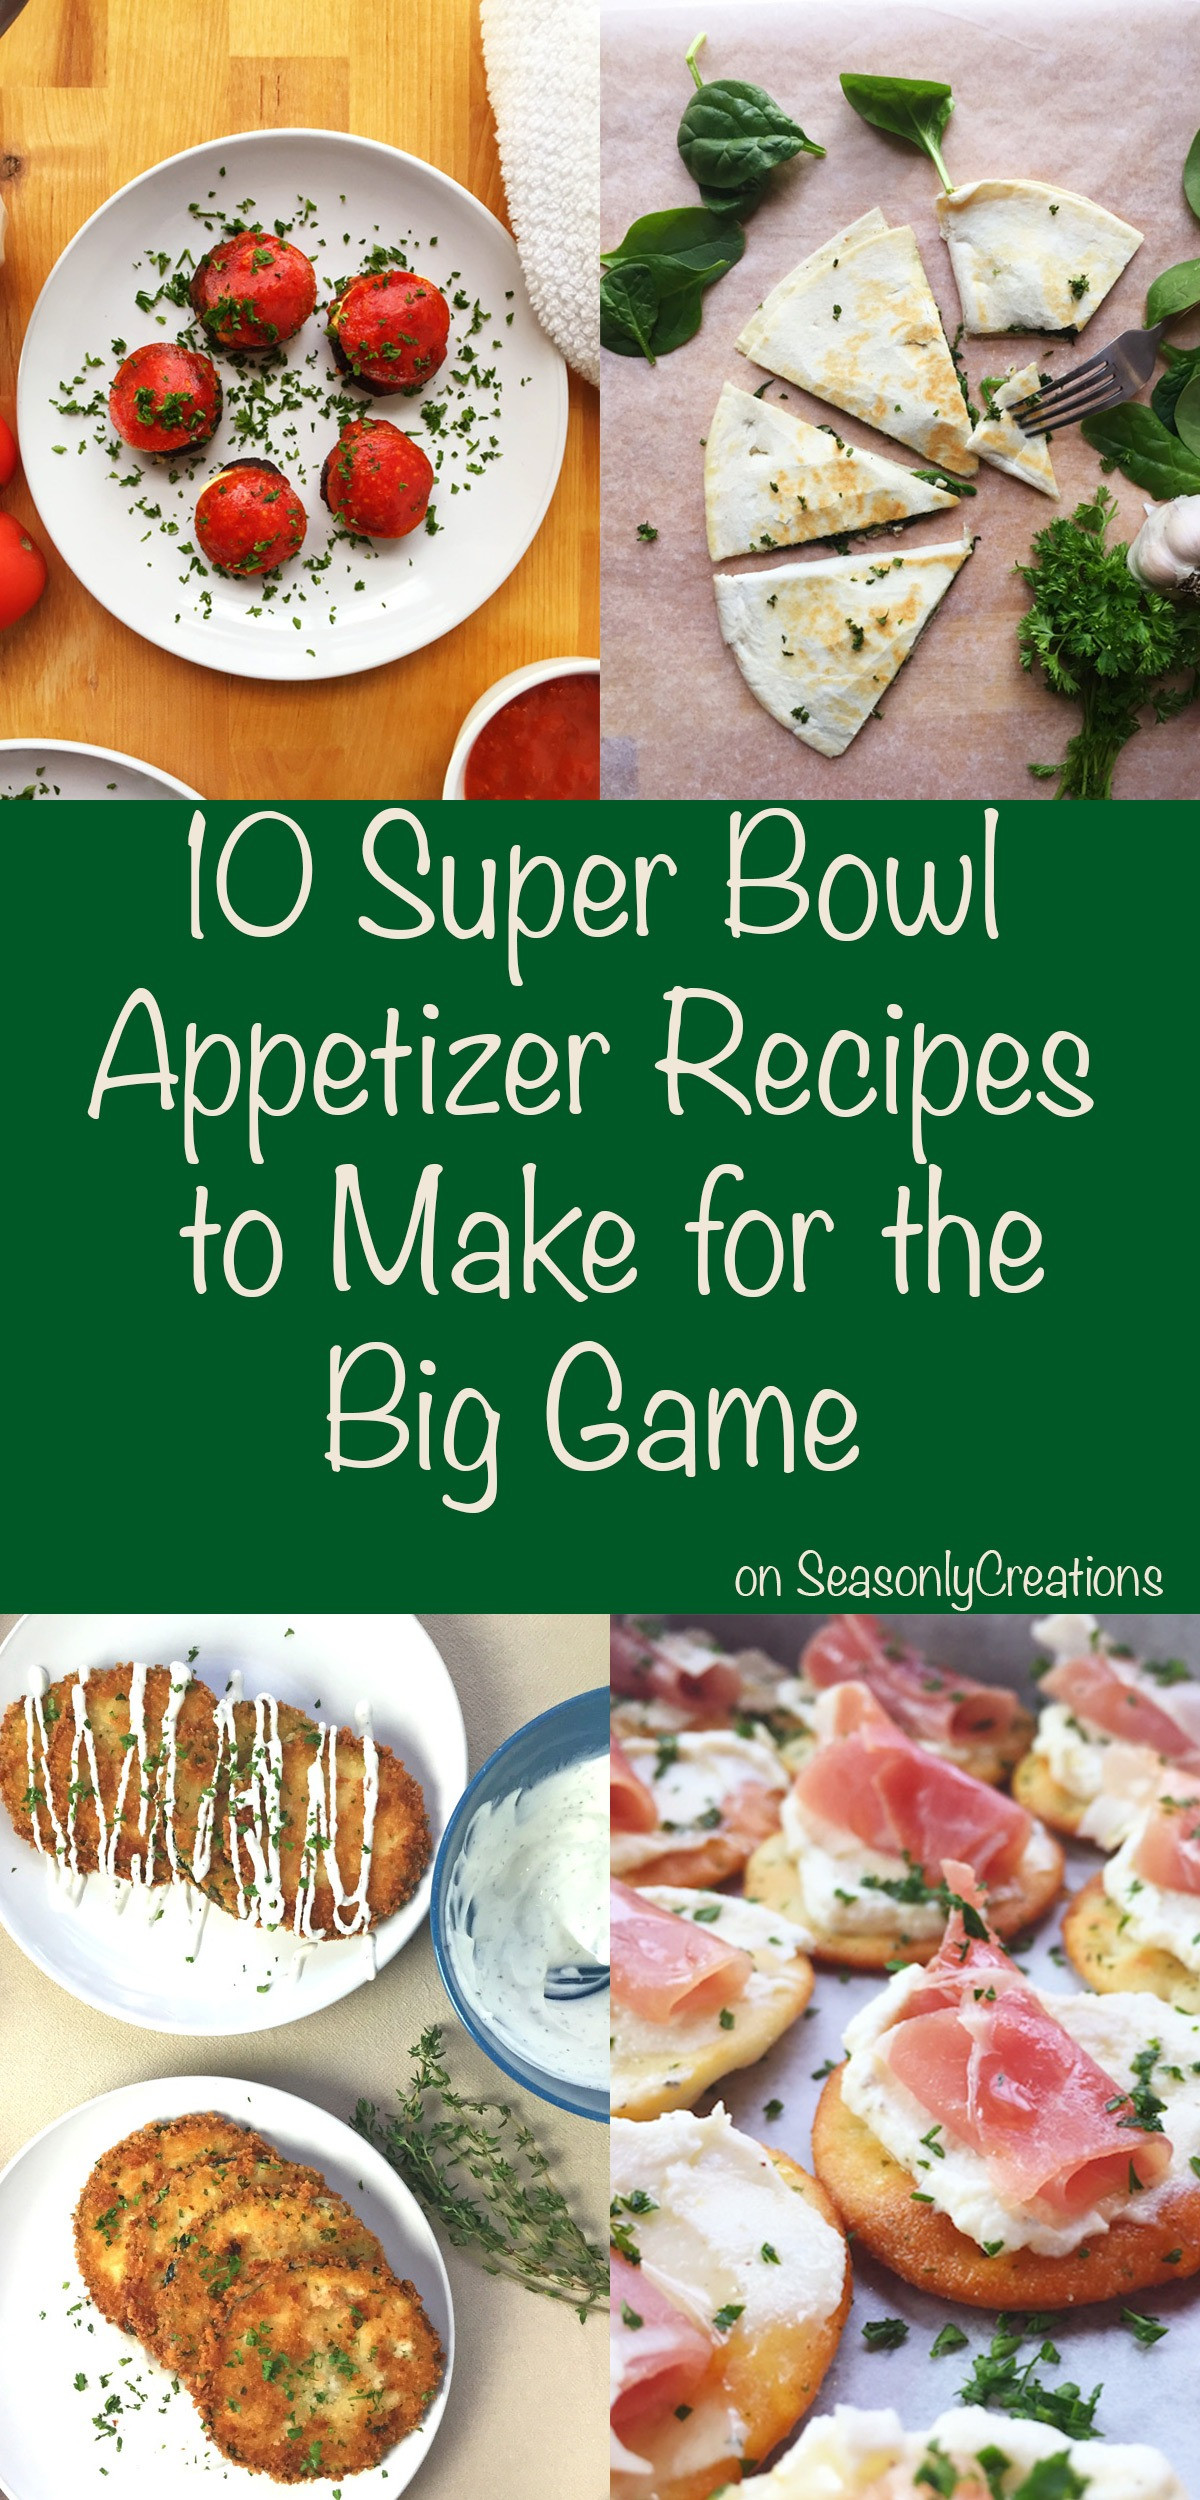 Healthy Super Bowl Appetizer Recipes
 10 Super Bowl Appetizer Recipes to Make for the Big Game